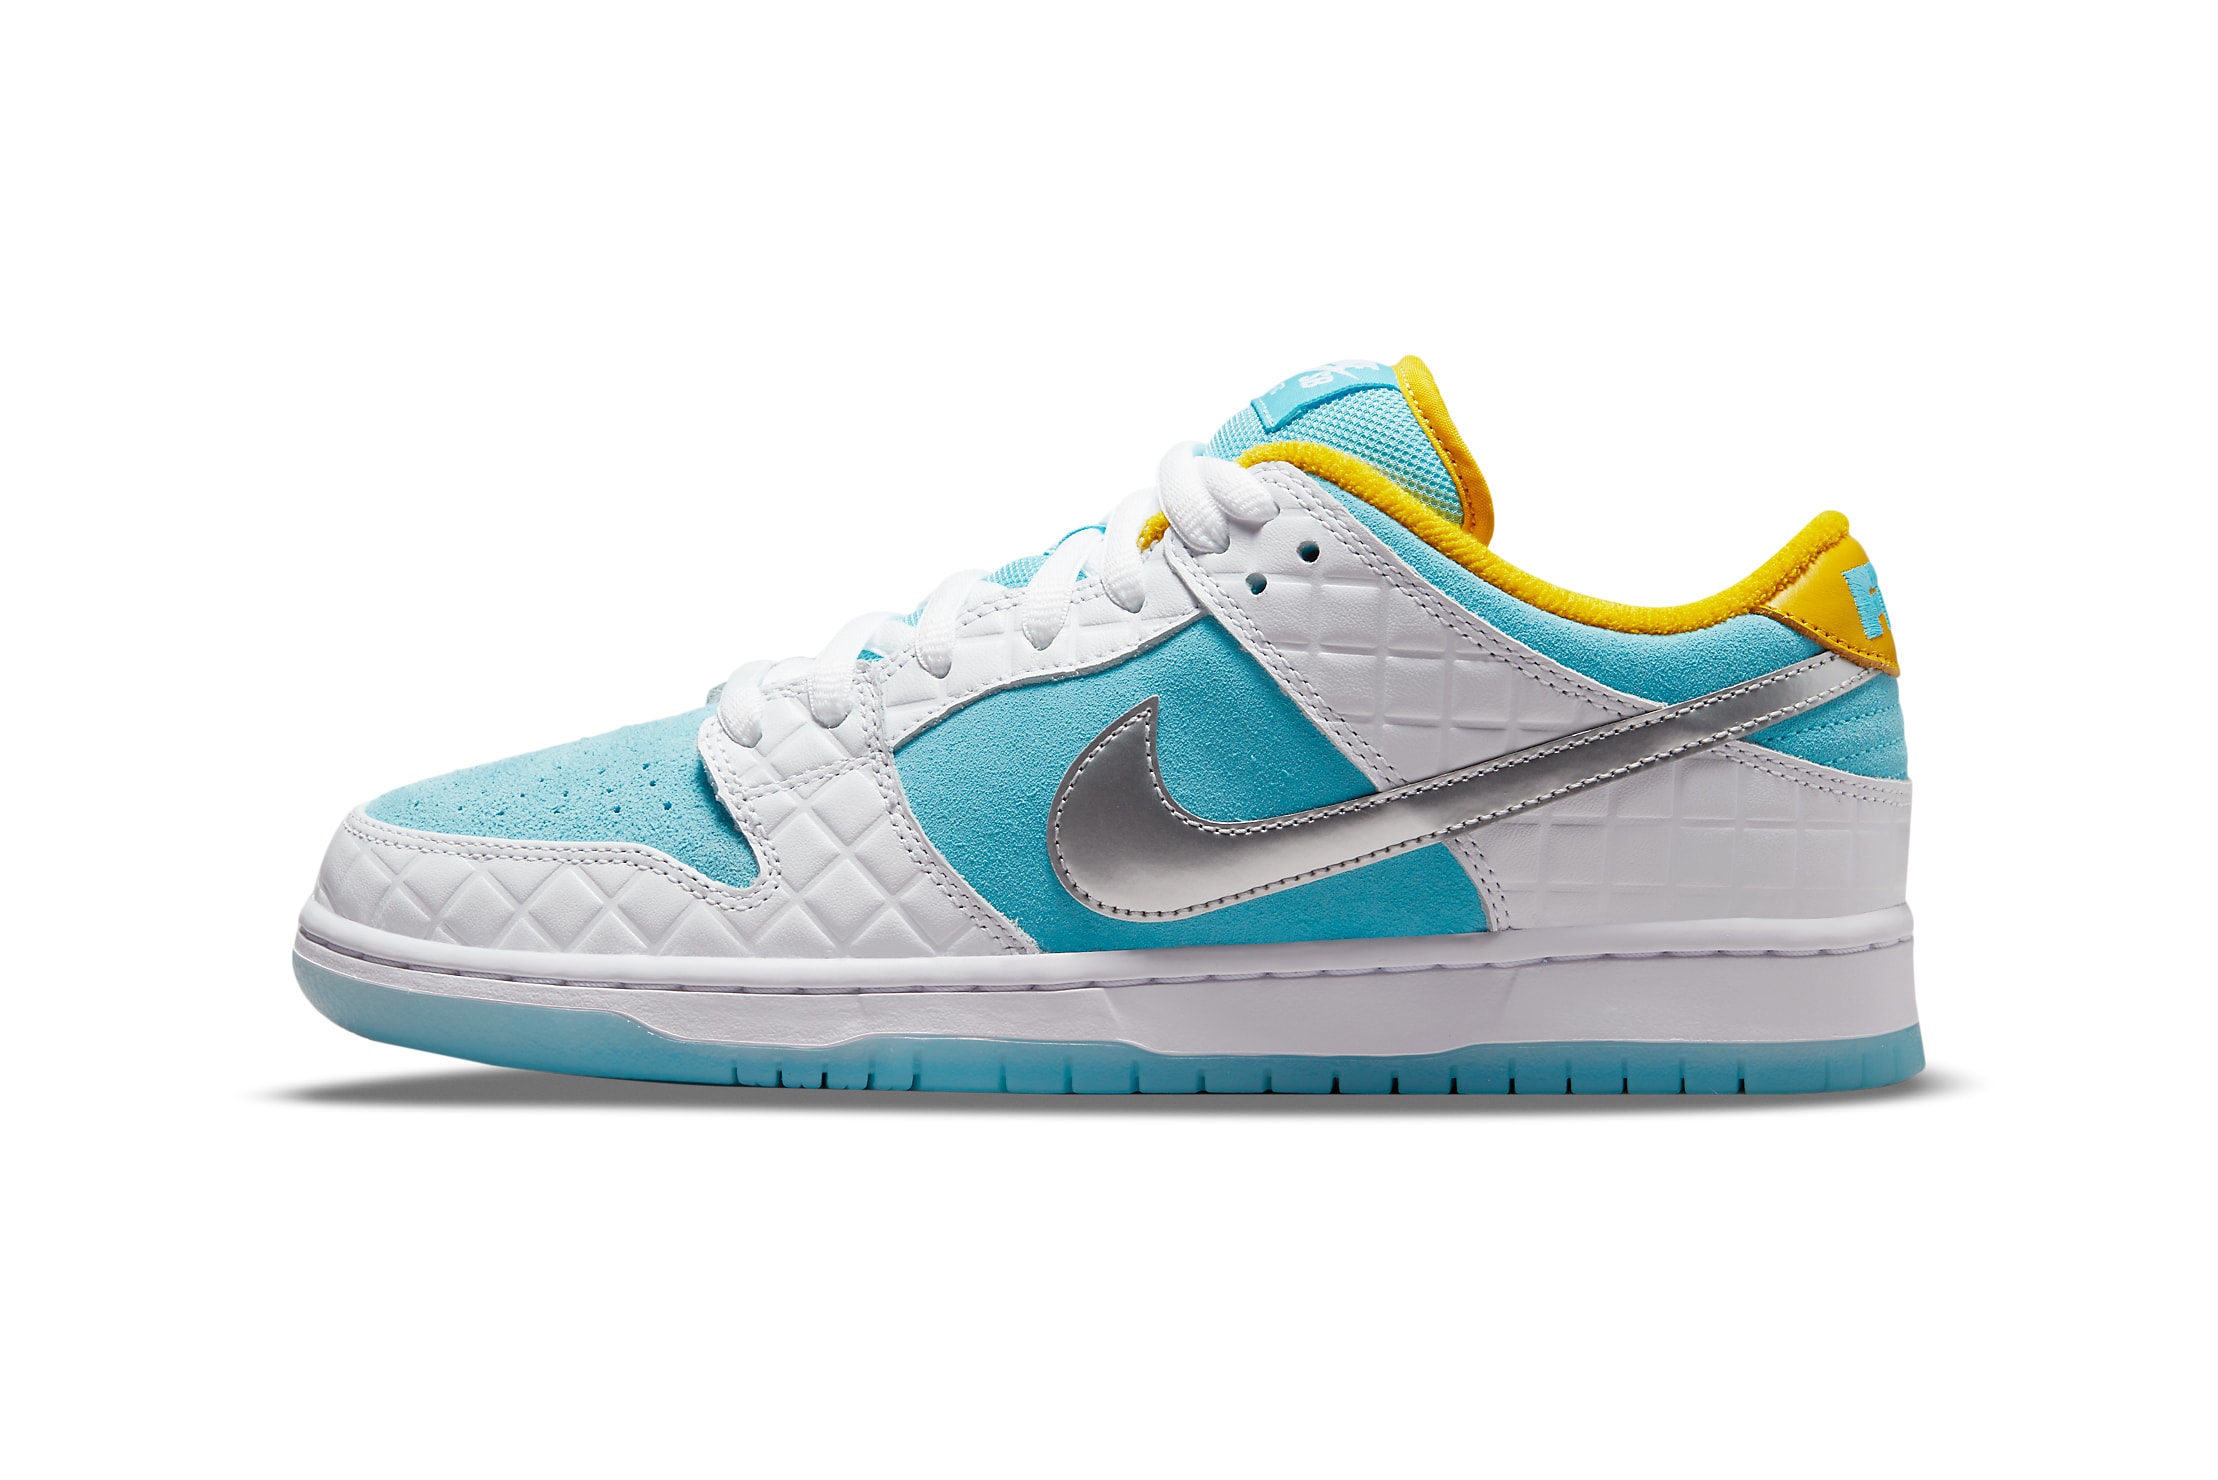 ftc skate shop nike sb skateboarding dunk low white yellow blue silver dh7687 400 official release date info photos price store list buying guide